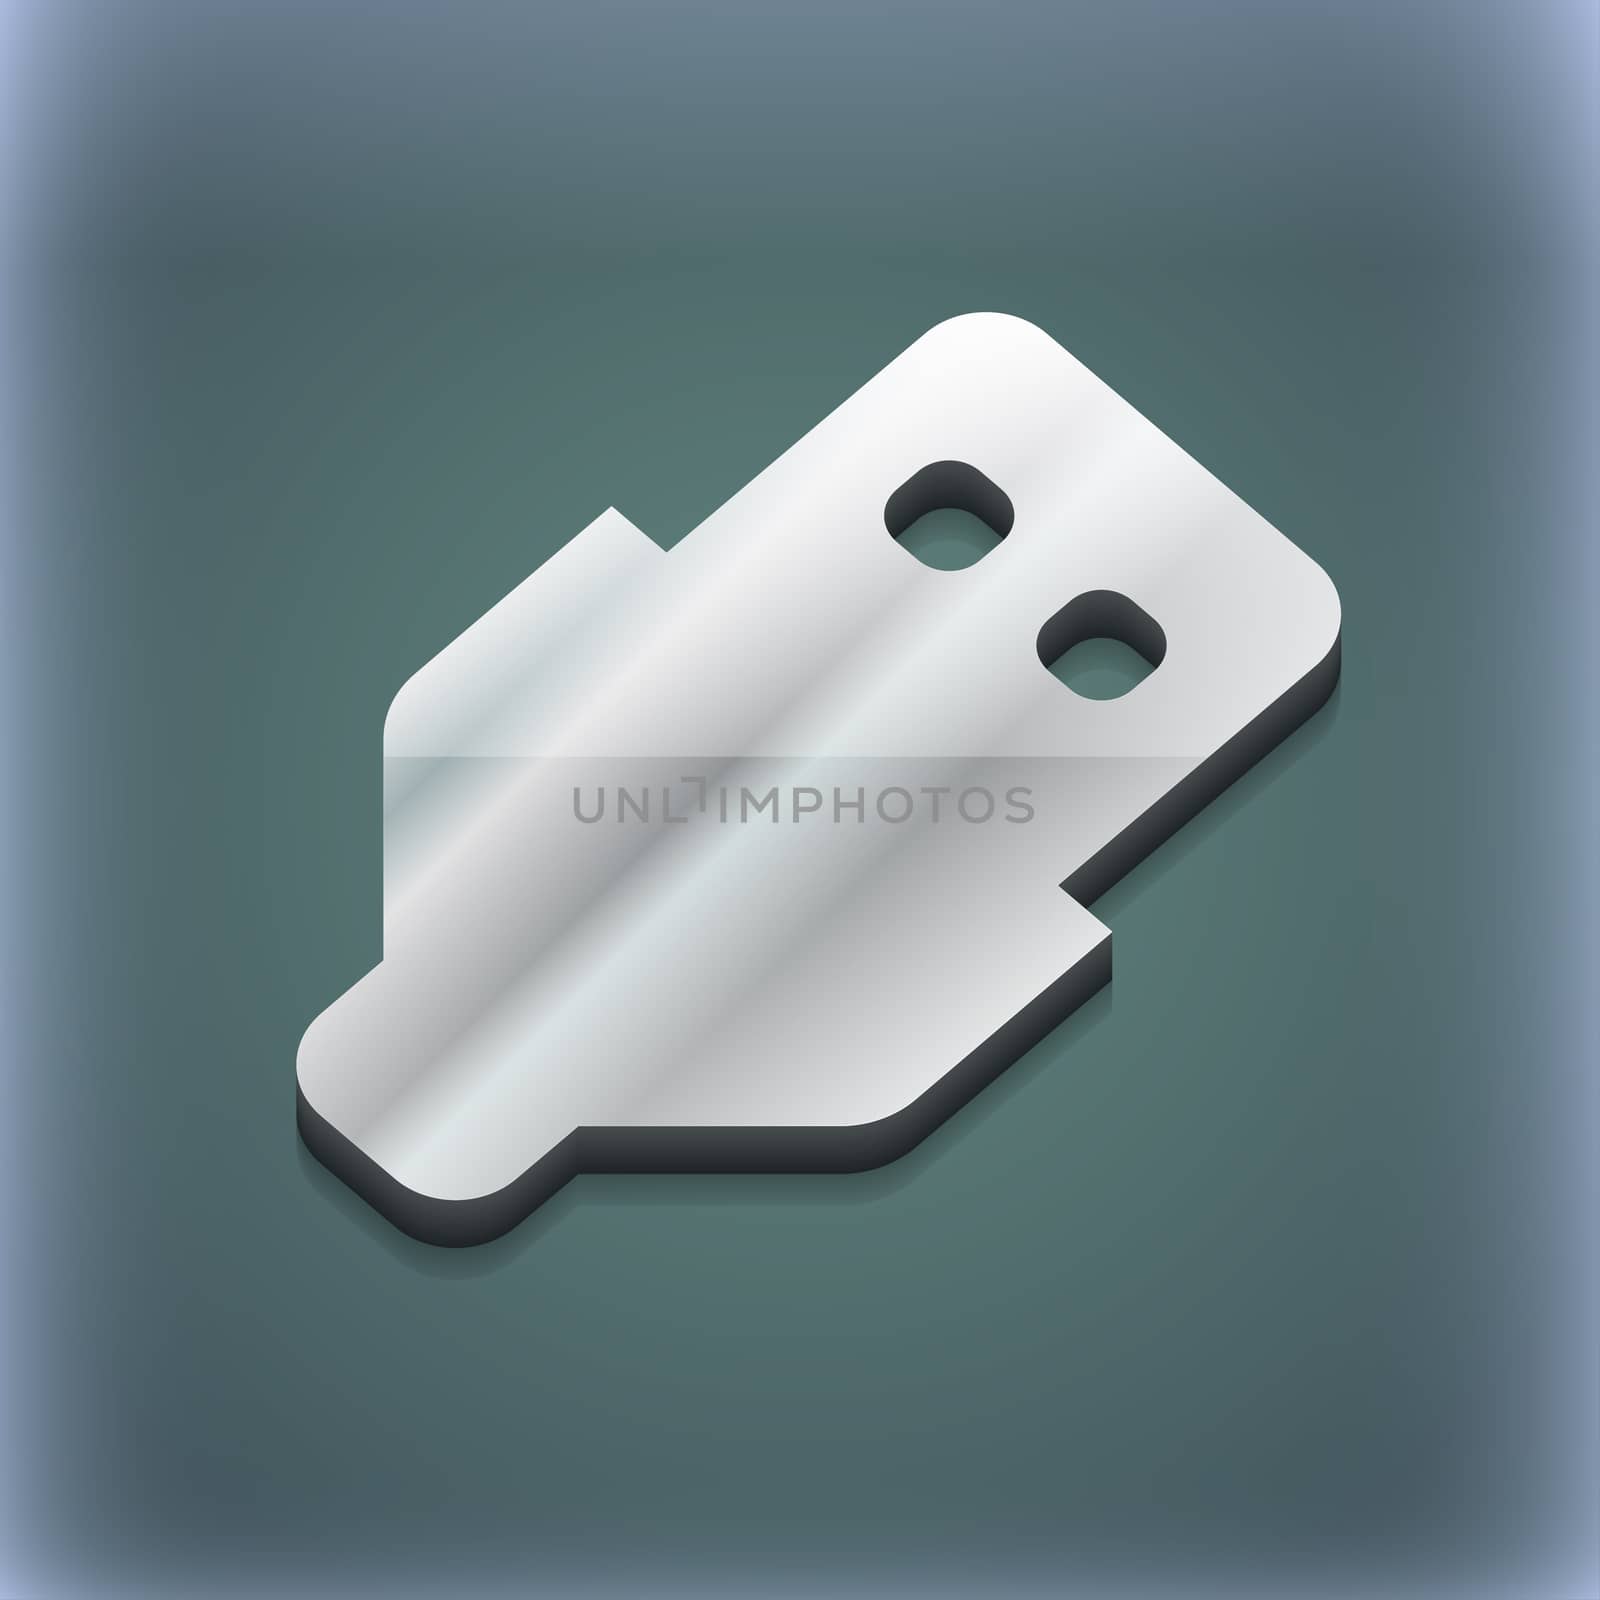 USB icon symbol. 3D style. Trendy, modern design with space for your text illustration. Raster version